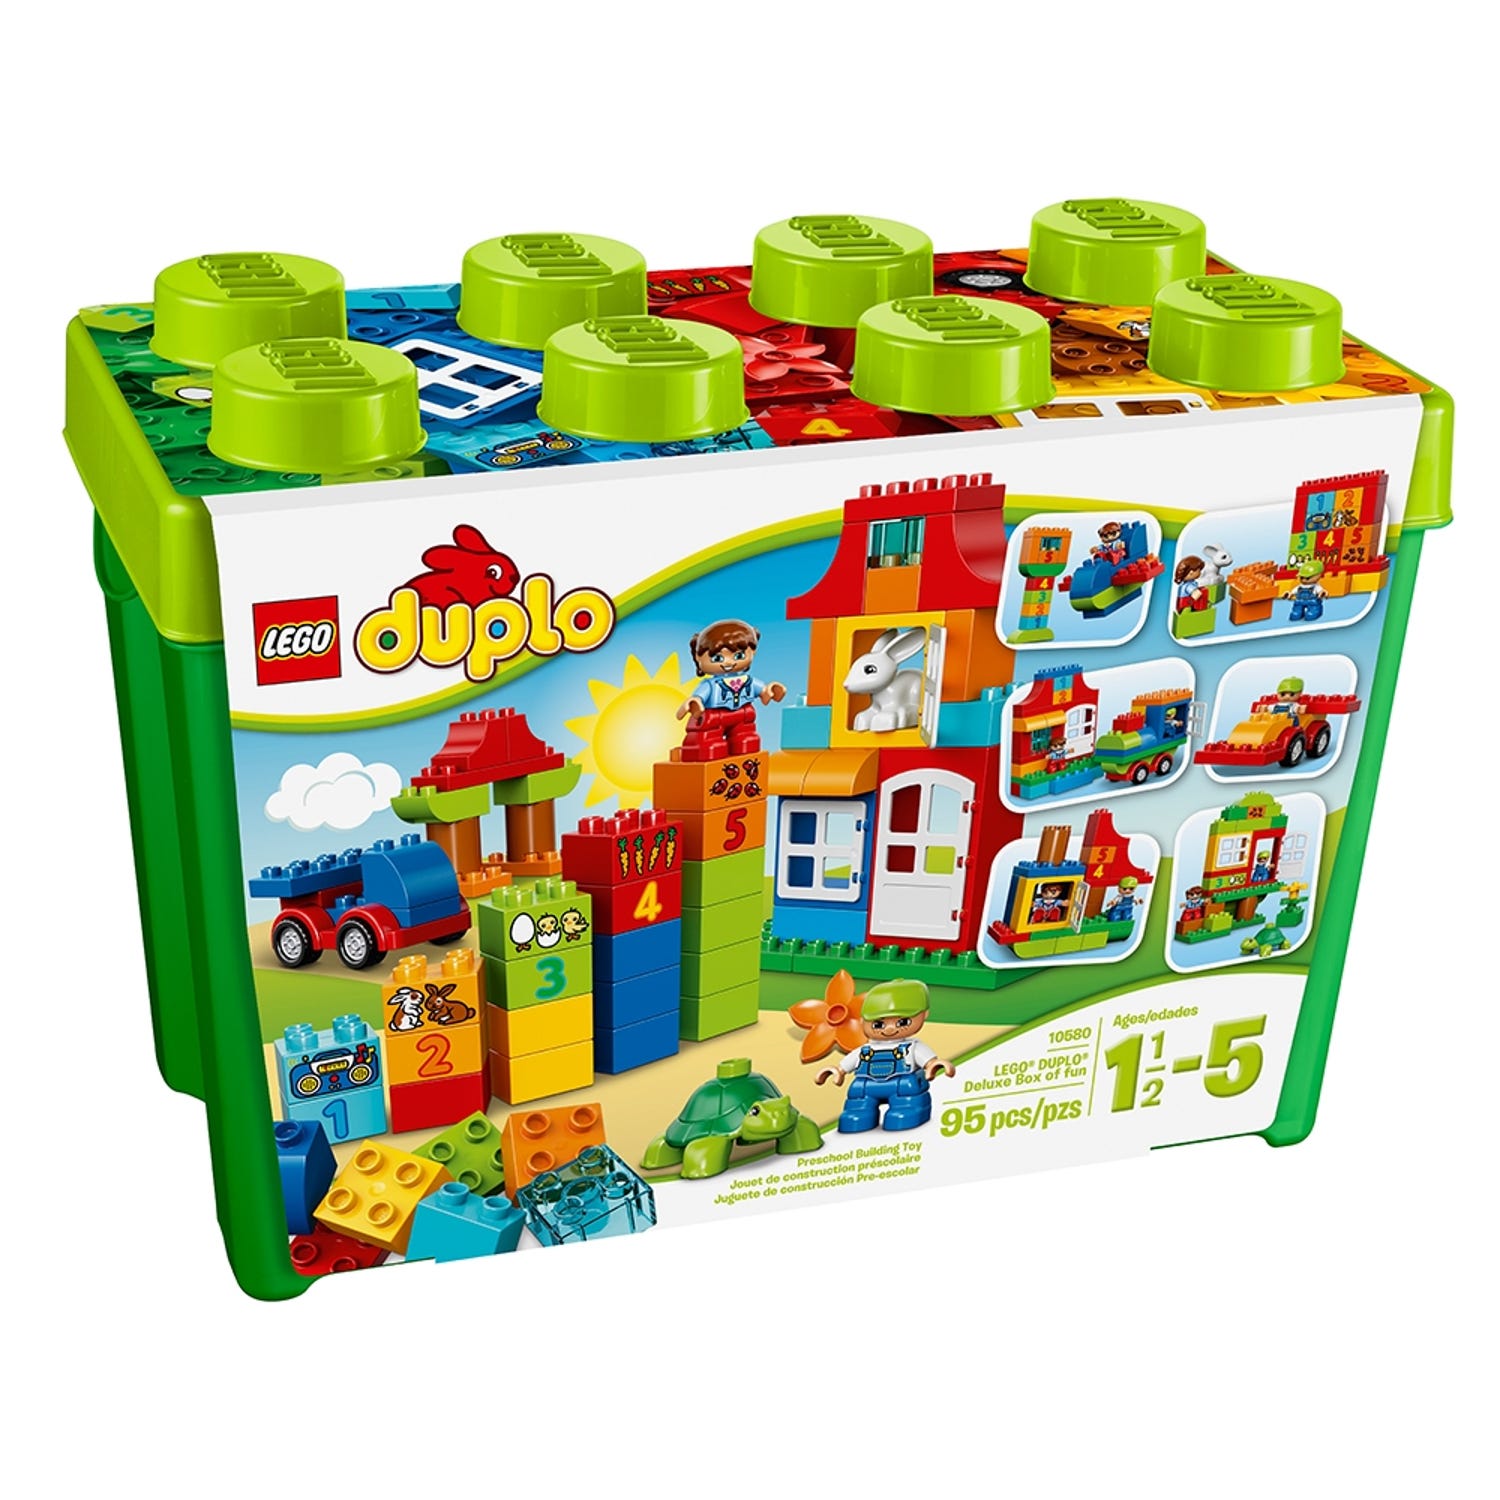 LEGO® DUPLO® Deluxe Box fun 10580 | | Buy online at the Official LEGO® Shop GB